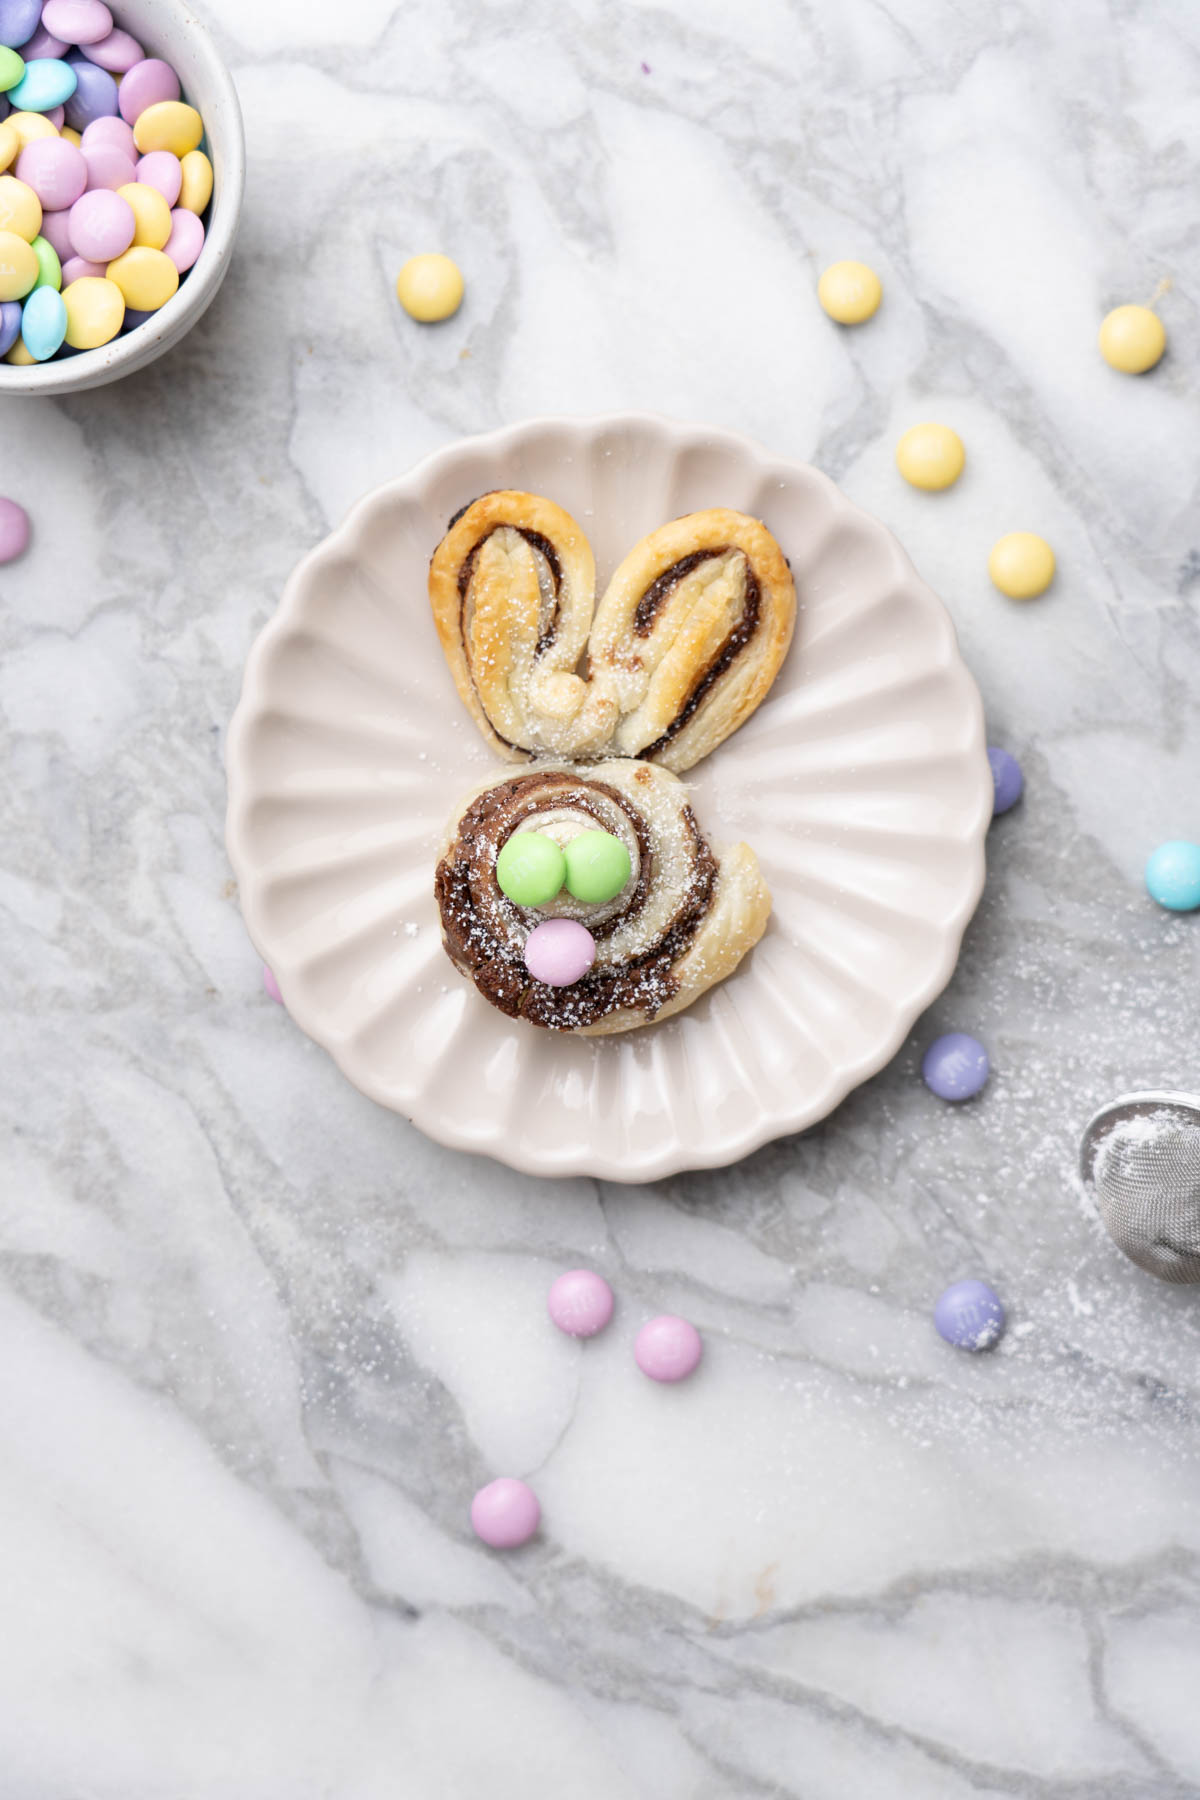 Puff pastry bunny with M&M's on a plate.